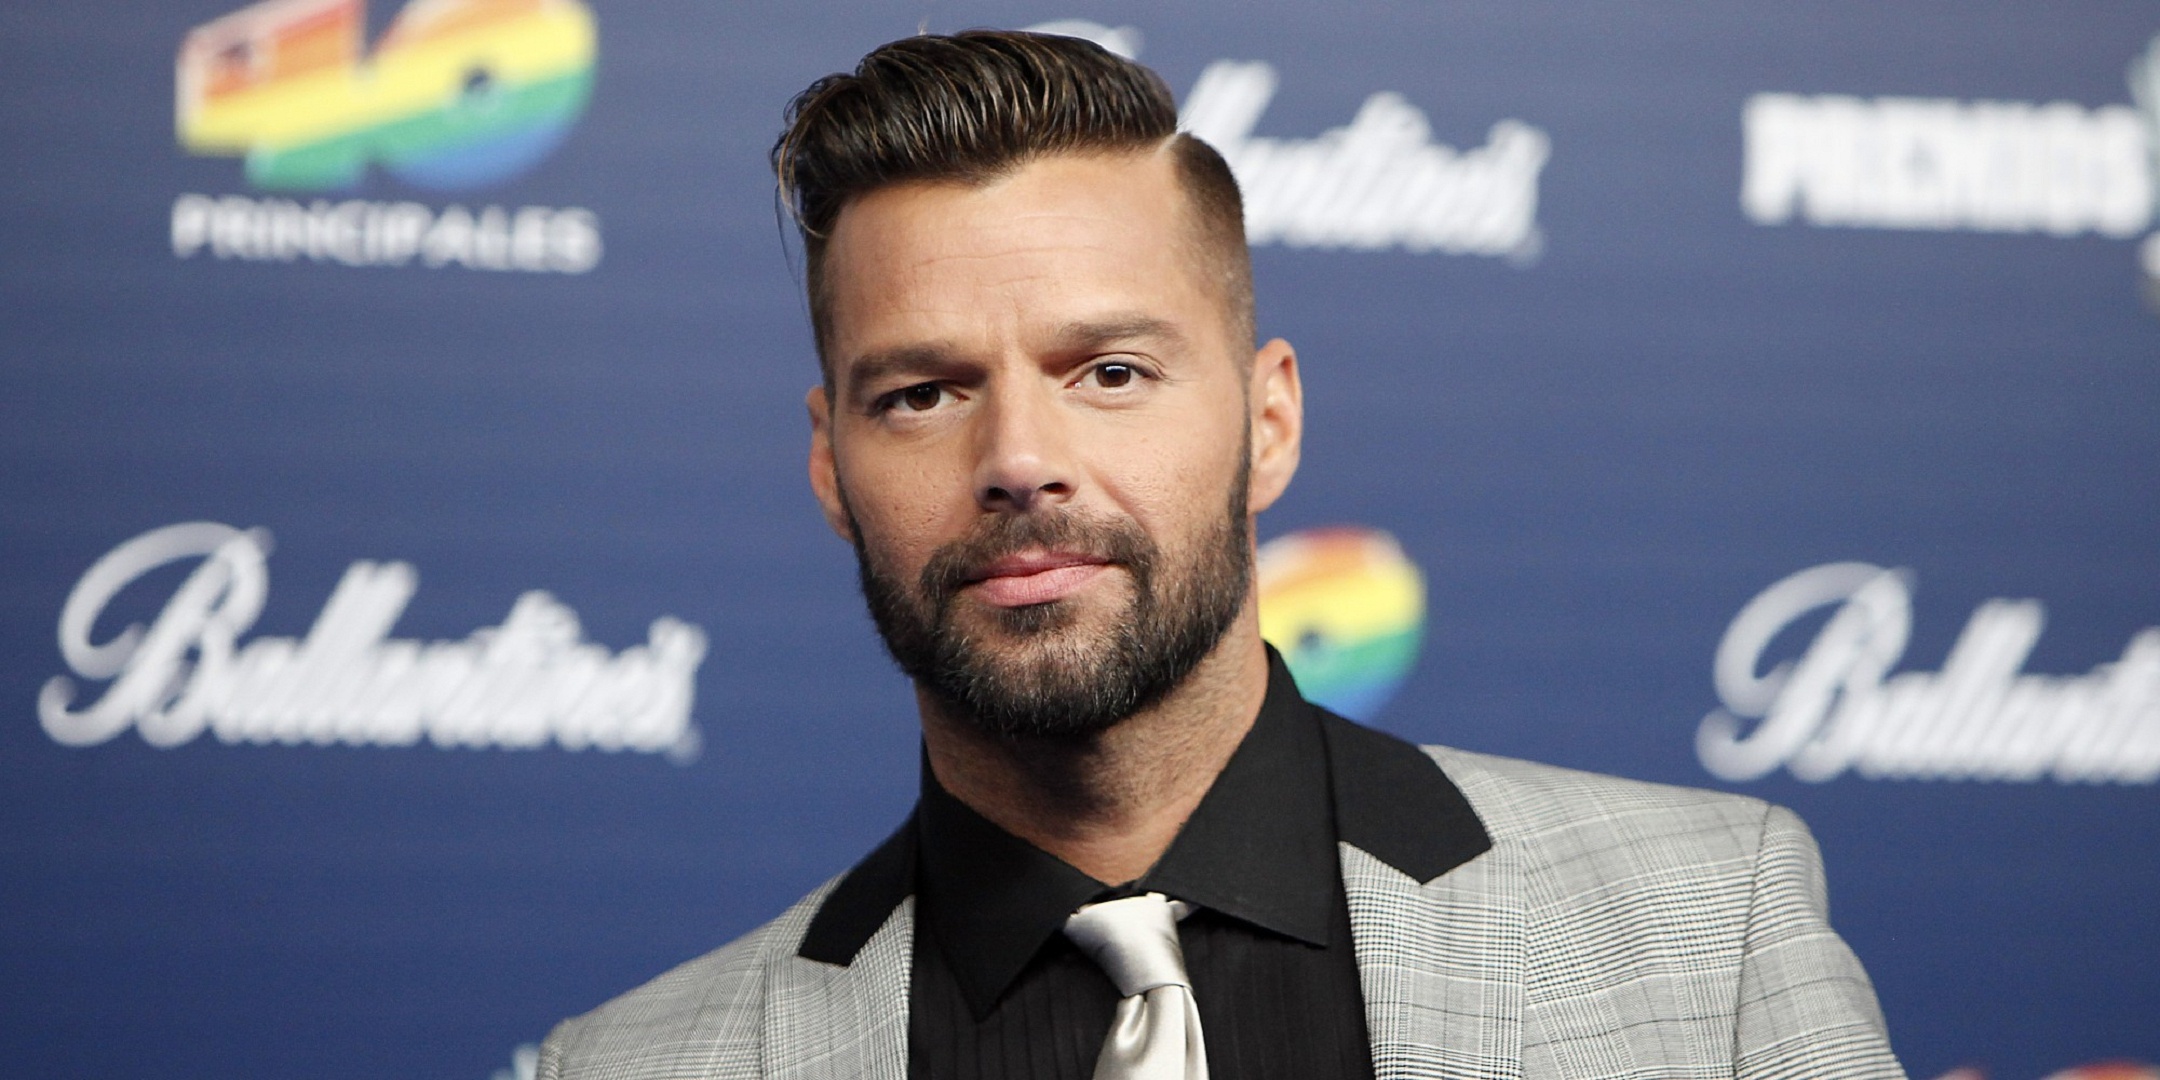 Ricky Martin, Eye-catching wallpapers, Captivating images, Vibrant backgrounds, 2160x1080 Dual Screen Desktop